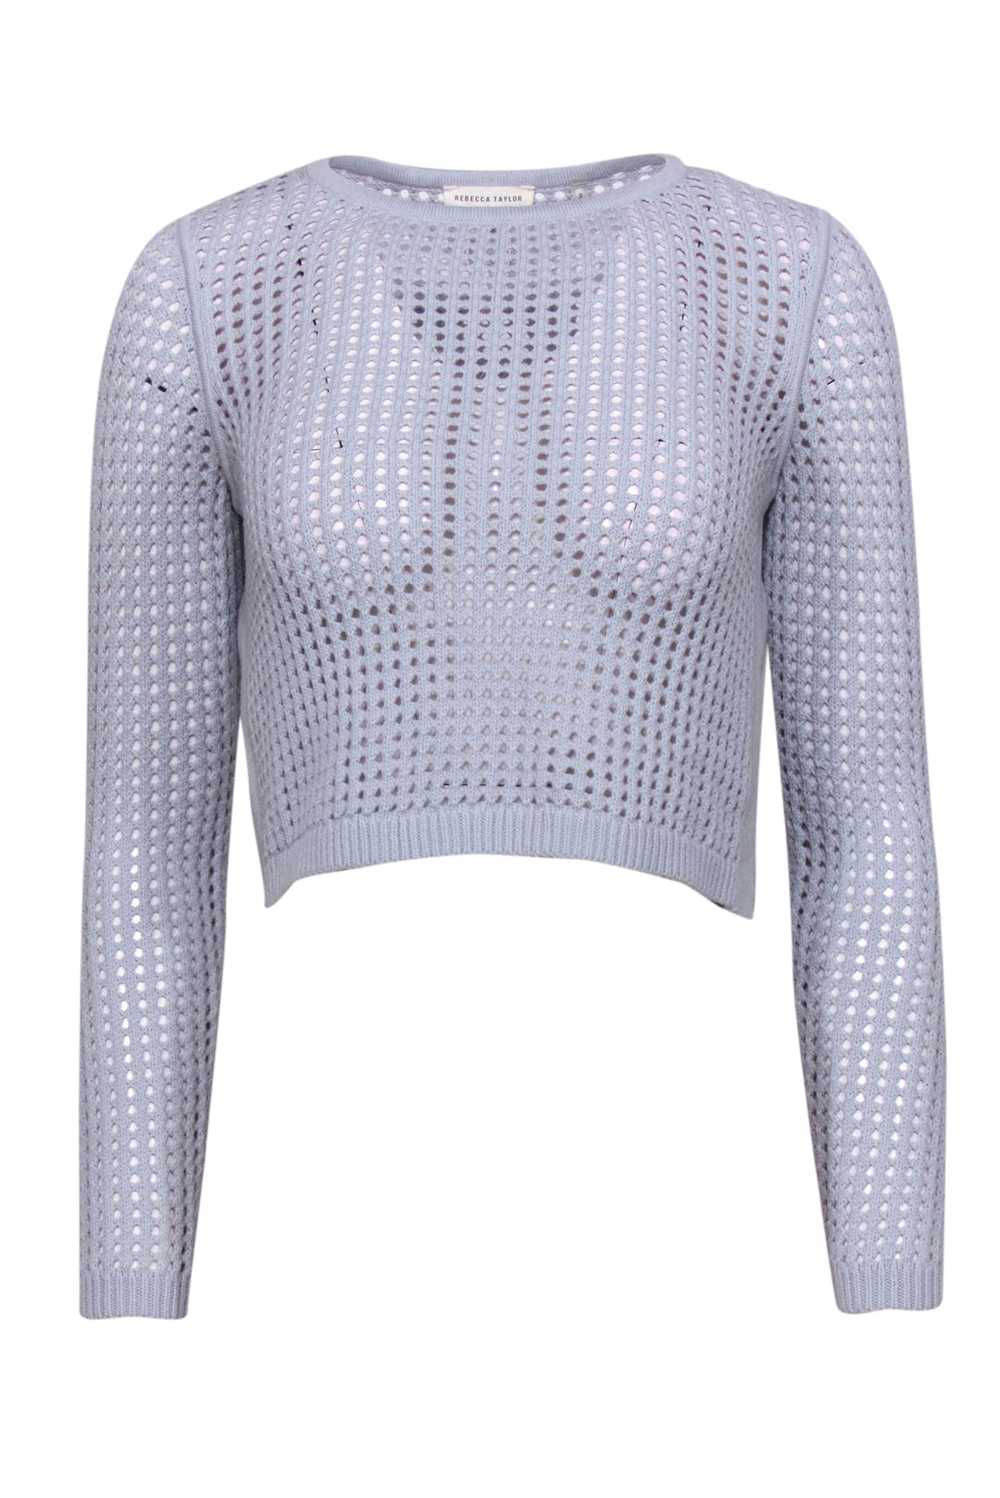 Rebecca Taylor - Baby Blue Open Knit Cropped Swea… - image 1